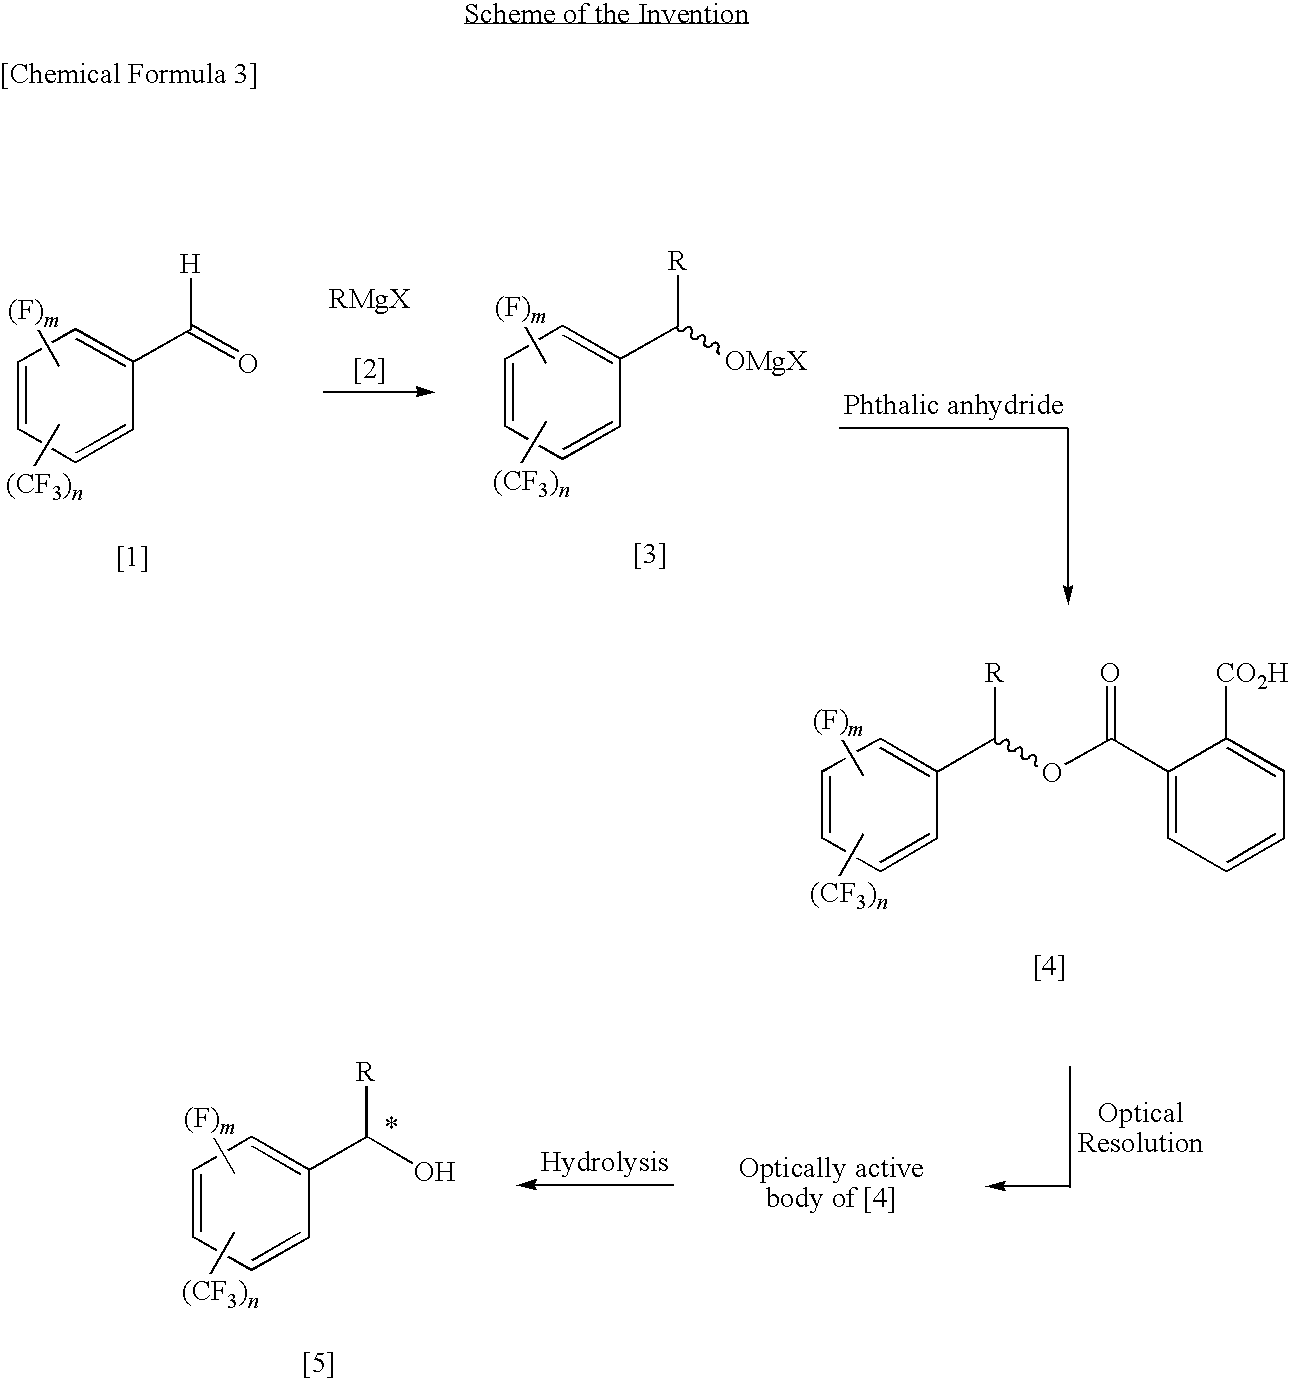 Process for Producing Optically Active Fluorobenzyl Alcohol